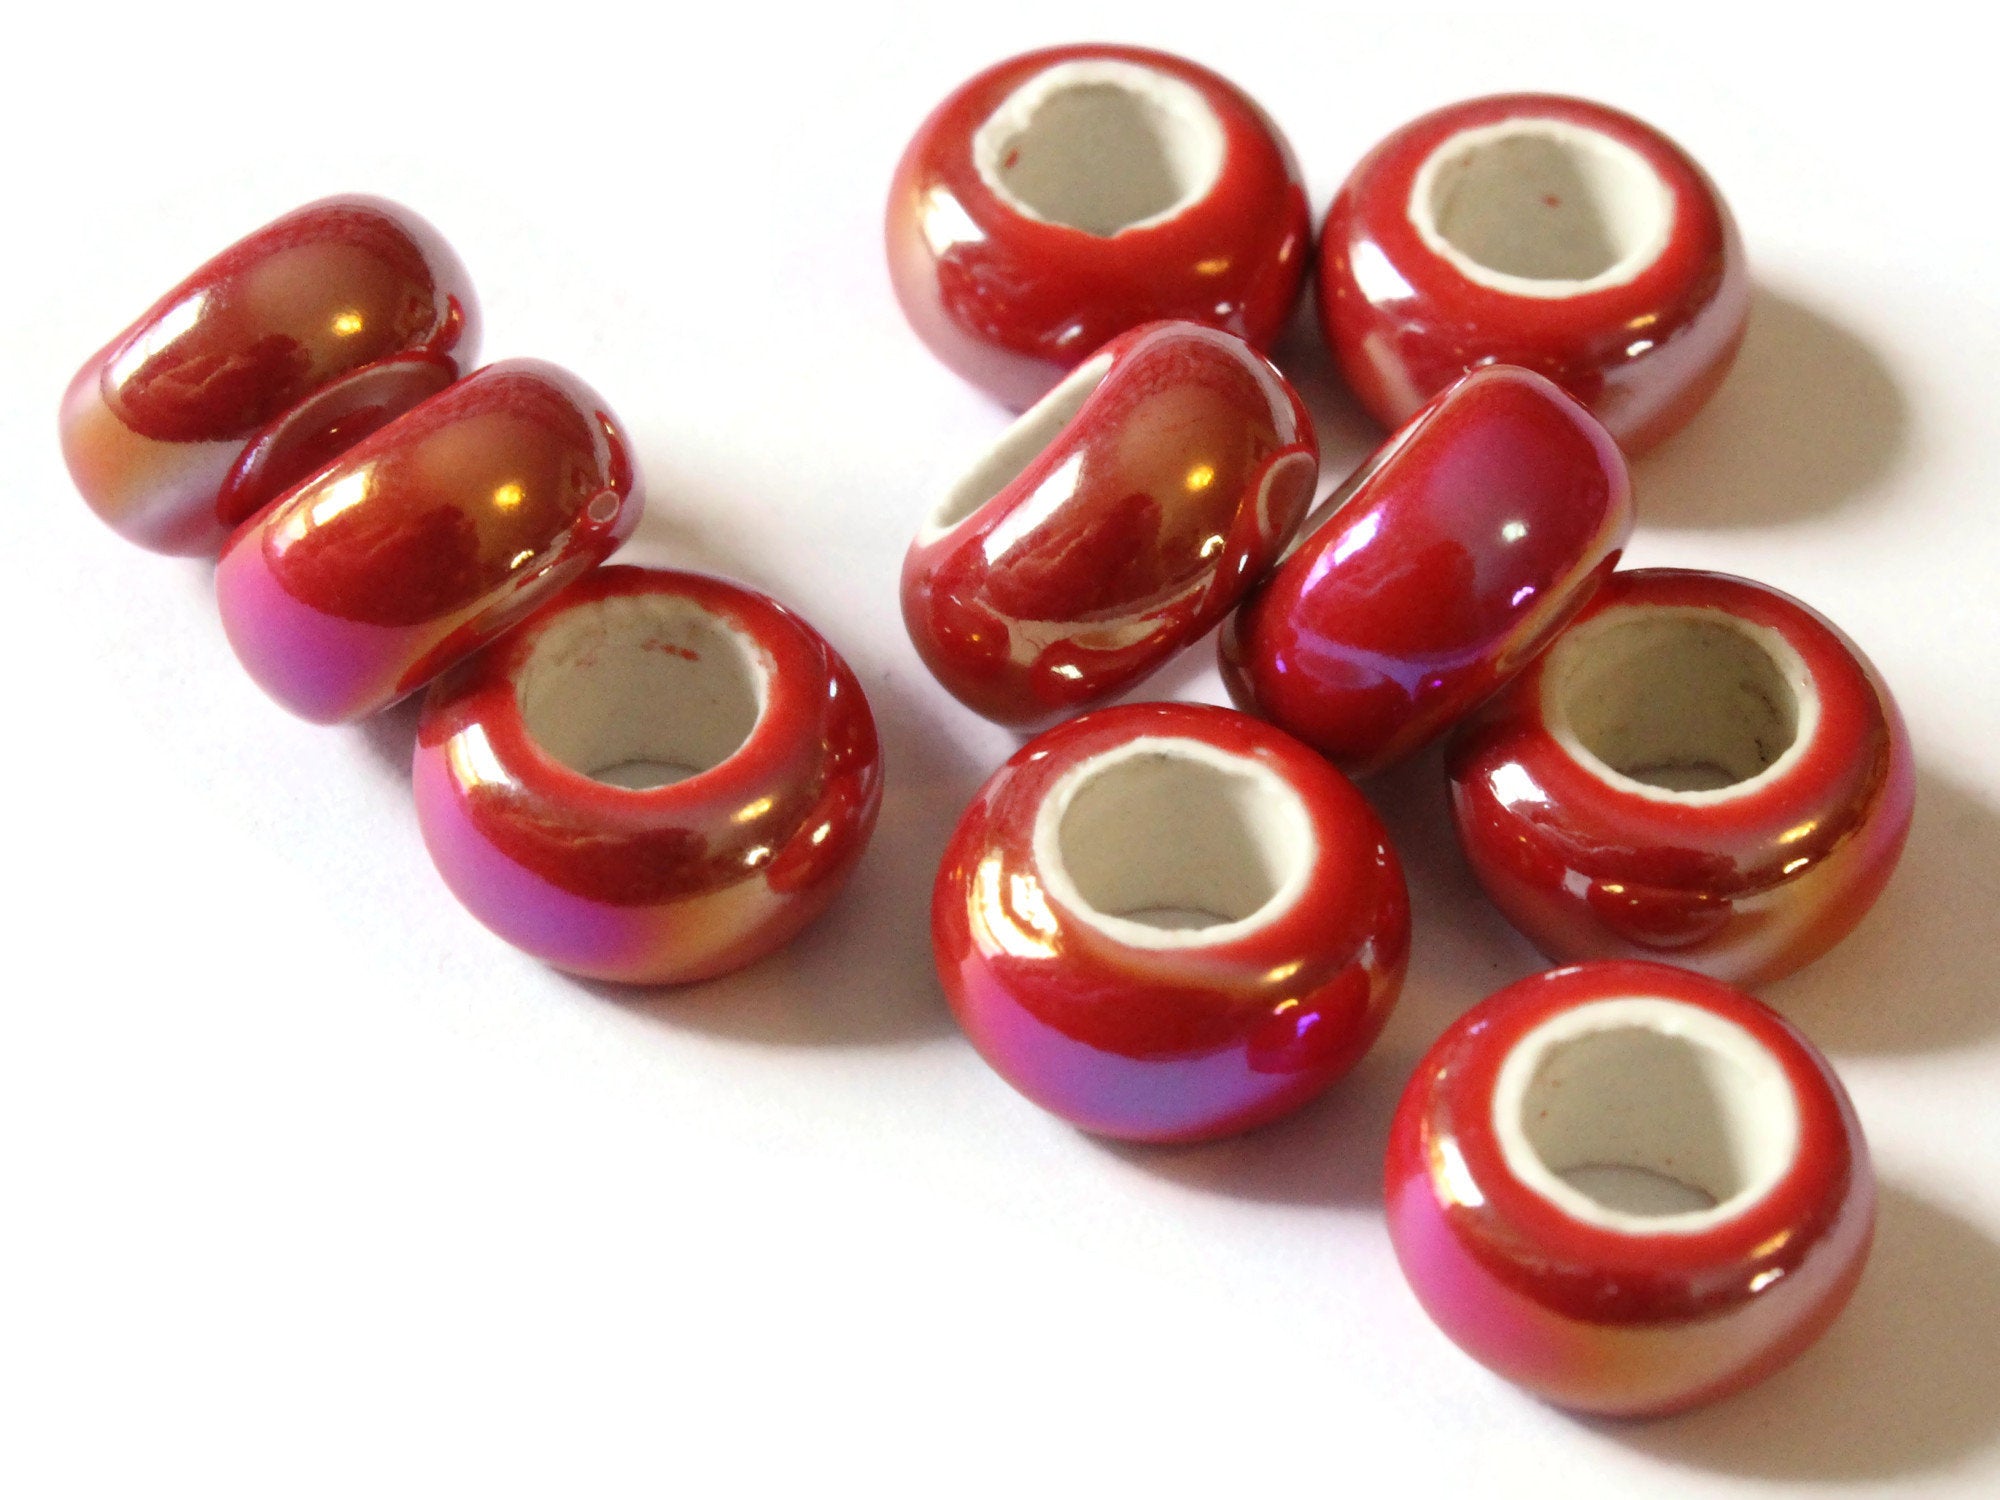 10 13mm Red Porcelain Rondelle Beads - Large Hole Beads